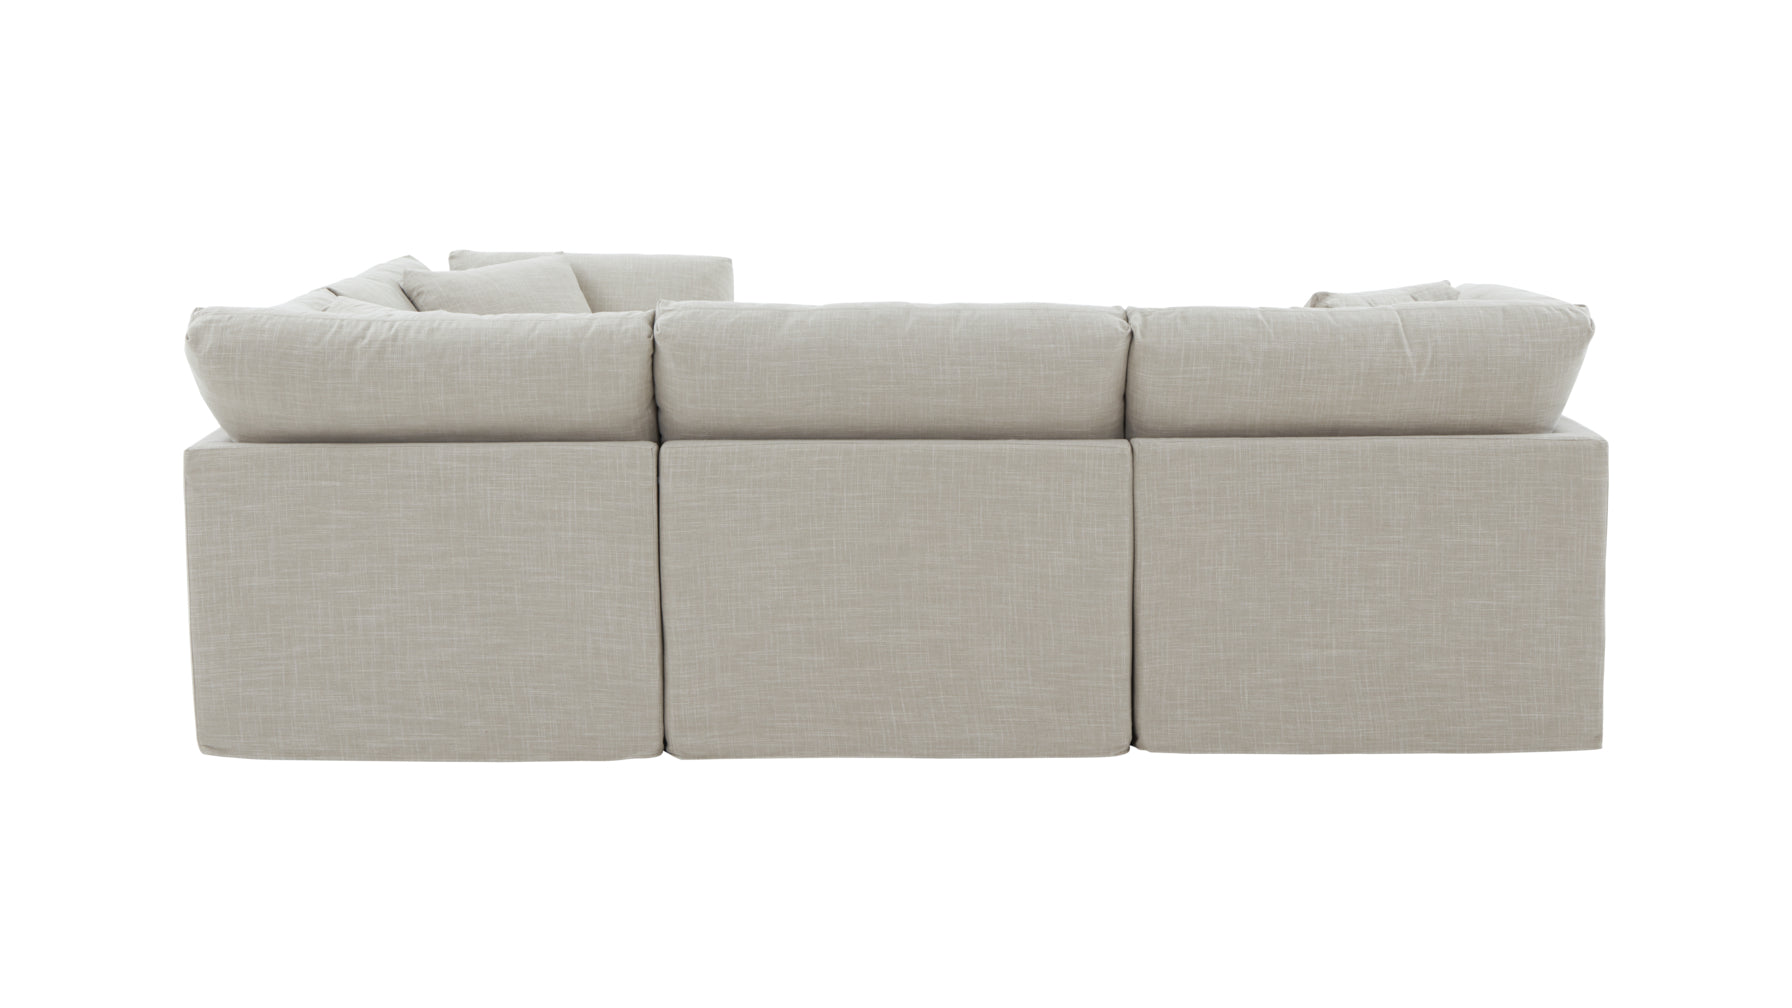 Get Together™ 4-Piece Modular Sectional Closed, Standard, Light Pebble - Image 6